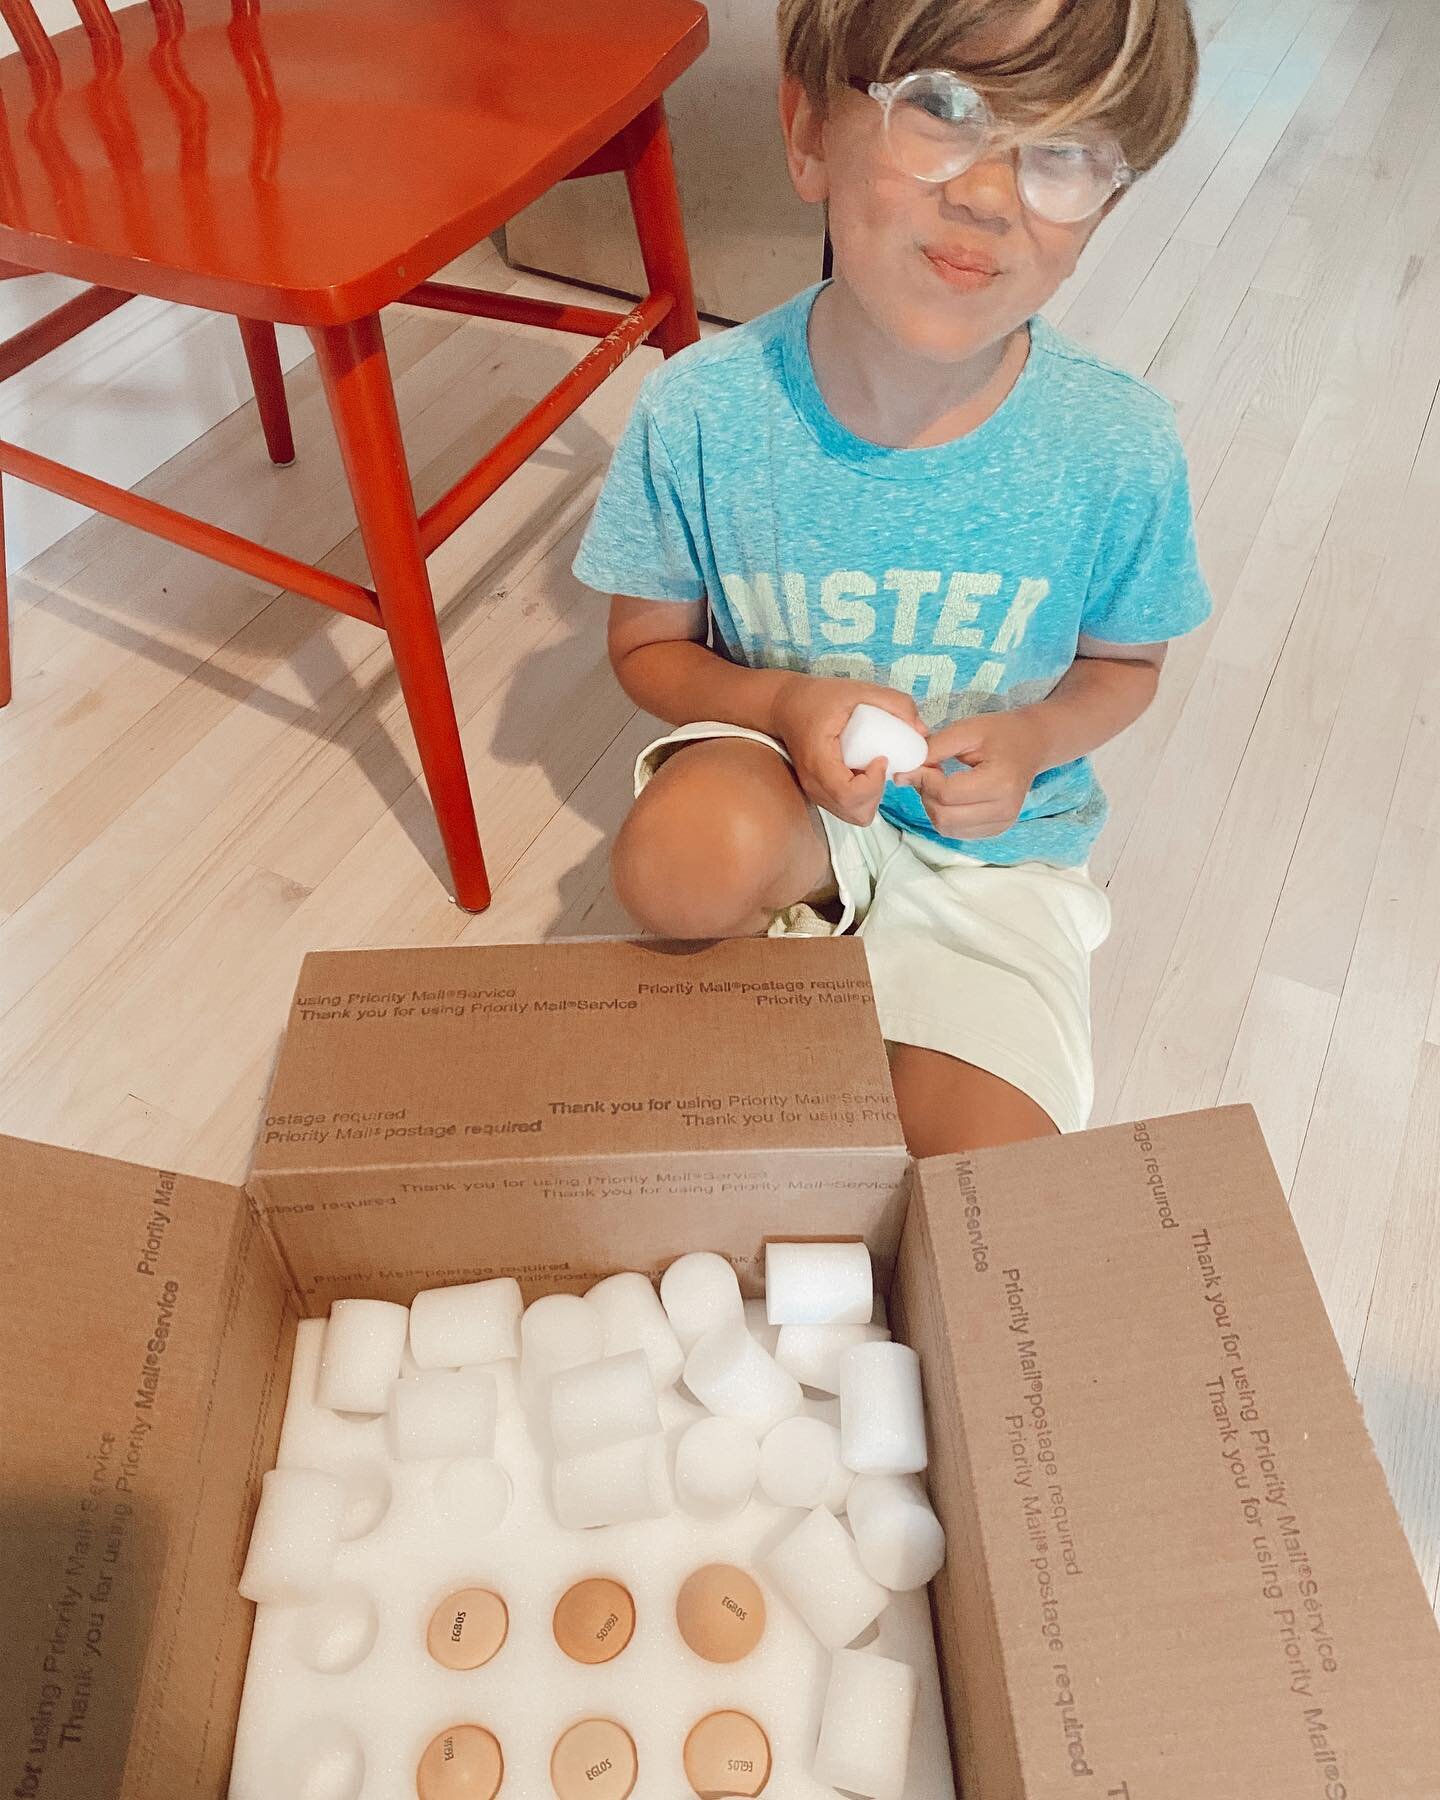 🐥 B I G Day over here for Brent! We finally got our baby chicken eggs thanks to @meyer_hatchery 🥚! We bought 6 eggs and are hoping to get 6 baby chicks... 🙏. Follow along with us on our new adventure. Any tips, please send! #babychicks #incubator 